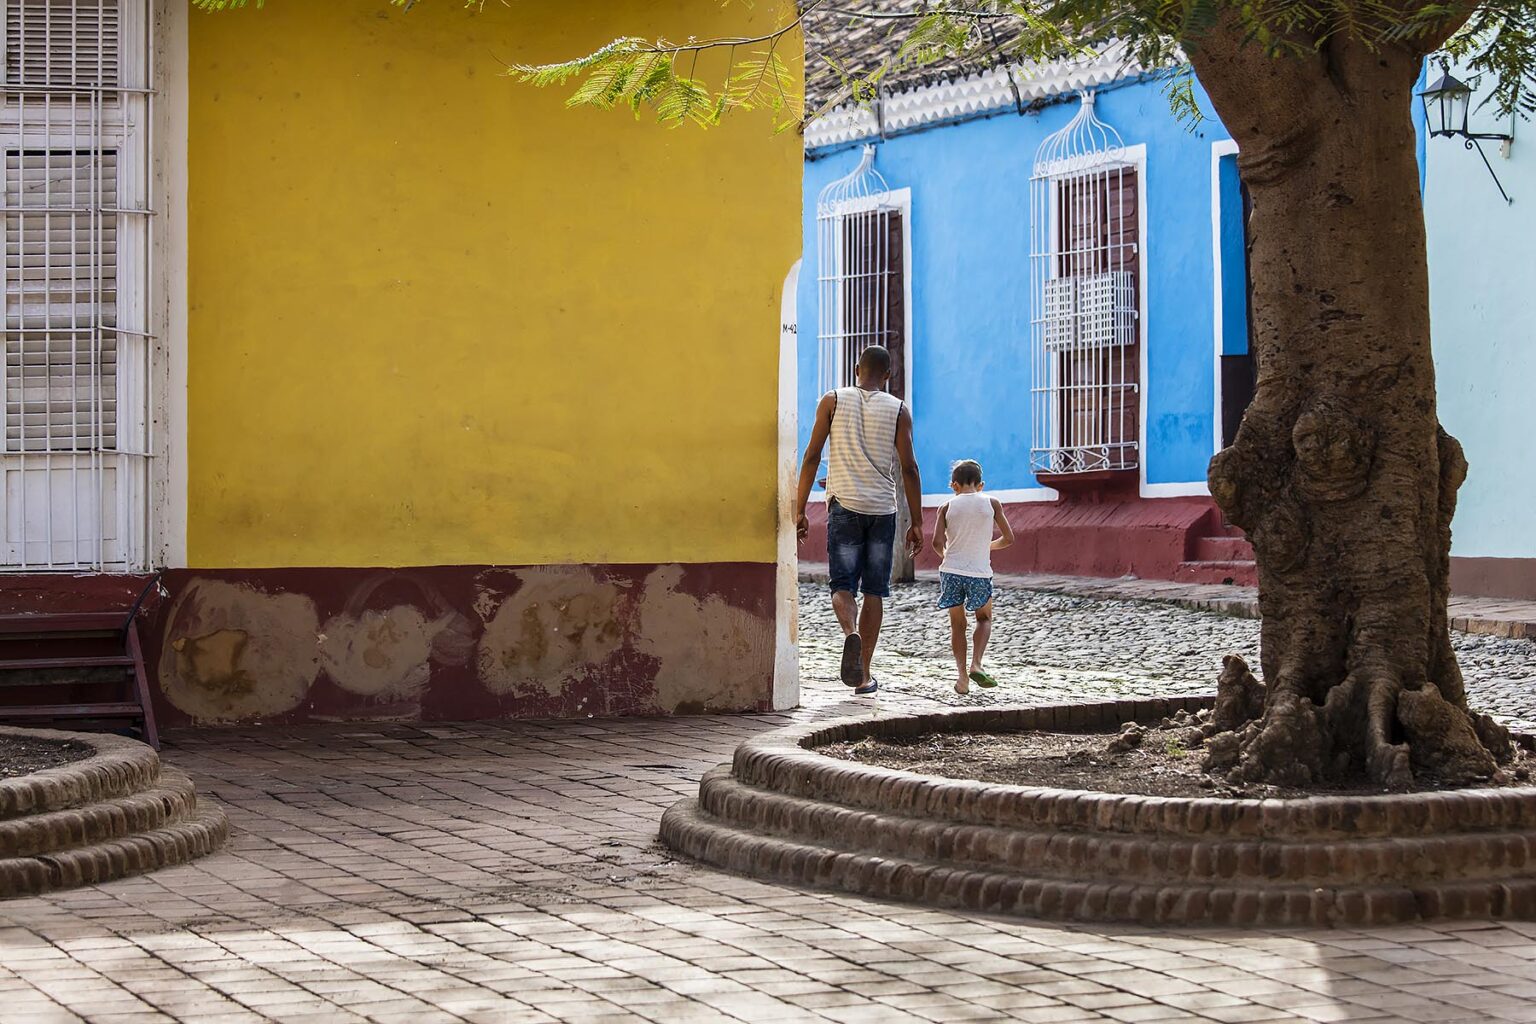 A father and son walking on the cobble stone streets - TRINIDAD, CUBA